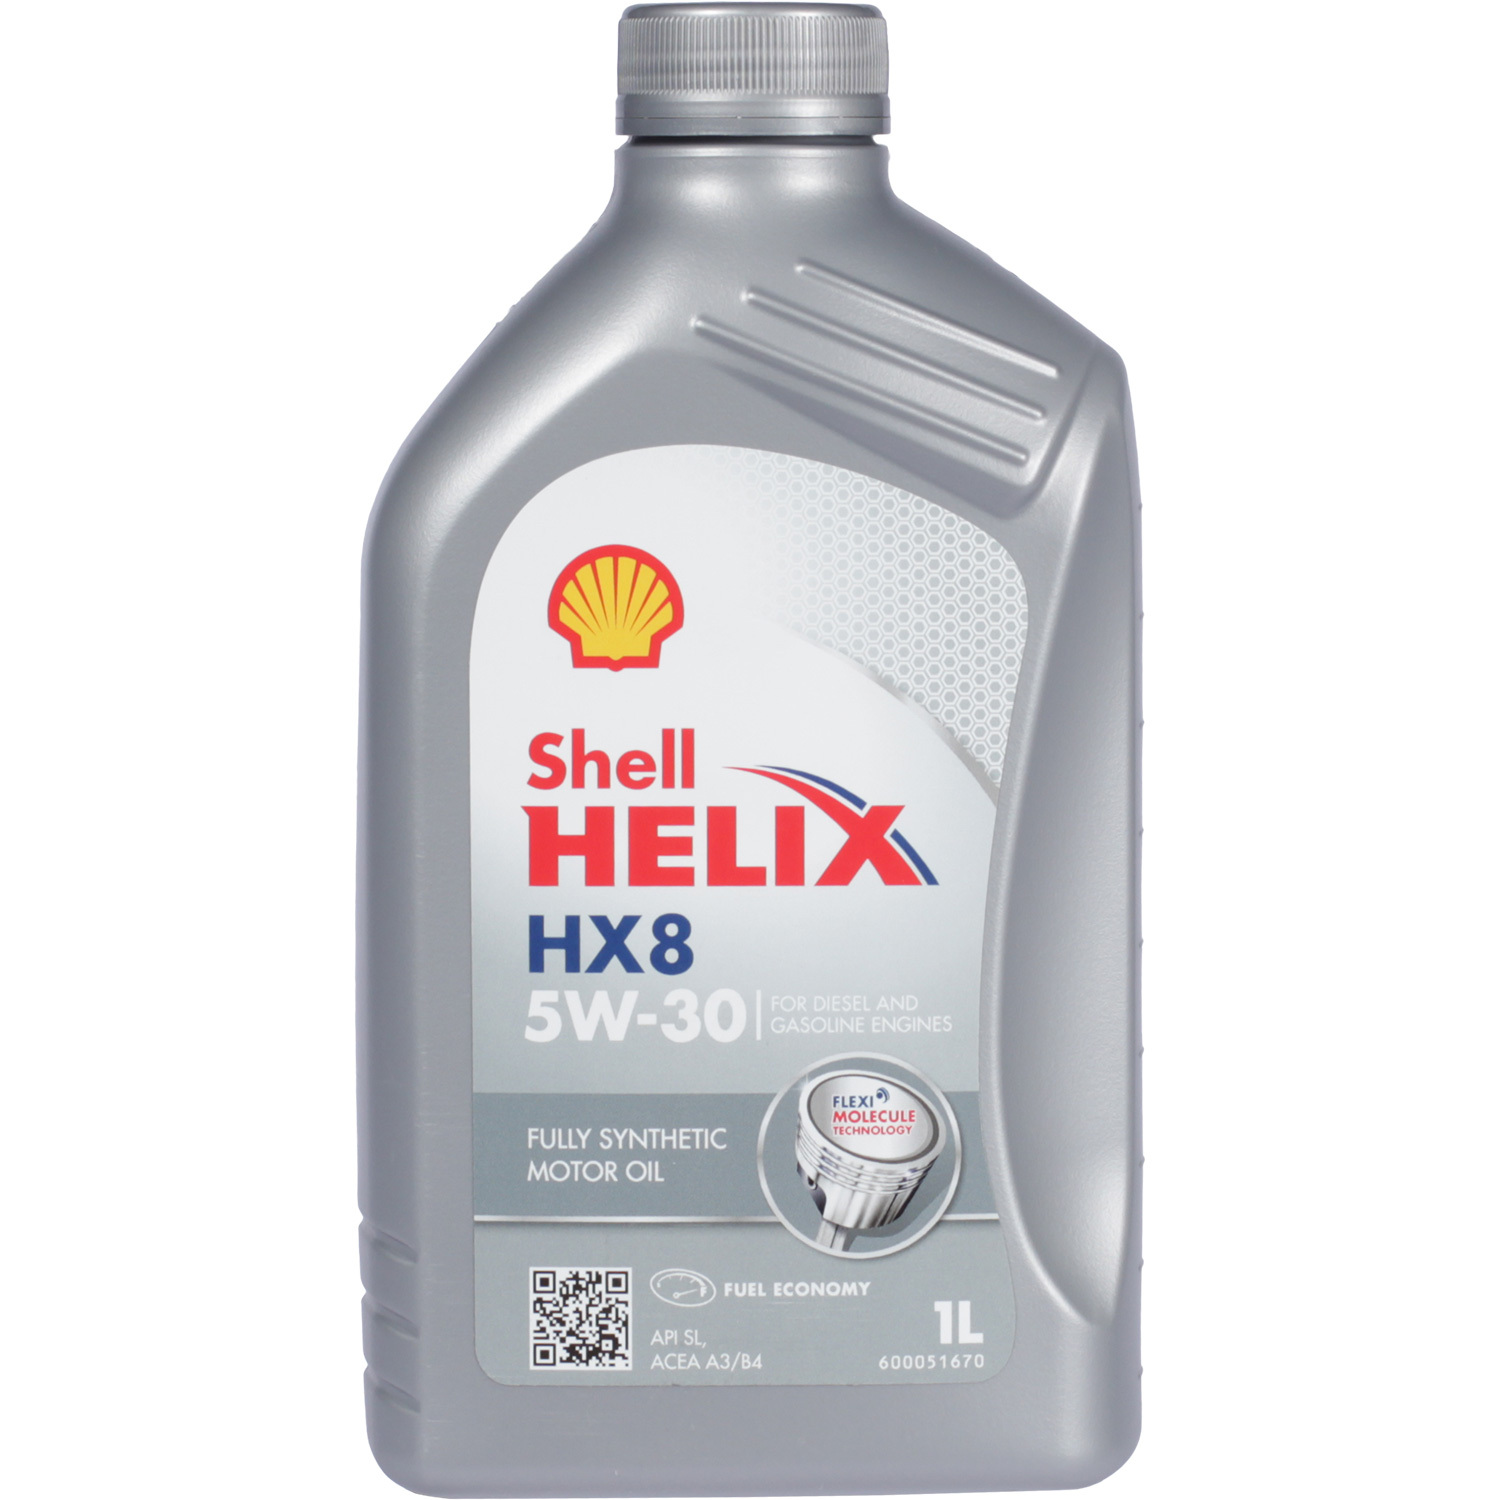 Shell Моторное масло Shell Helix HX8 5W-30, 1 л масло моторное shell helix ultra 5w 30 4 л